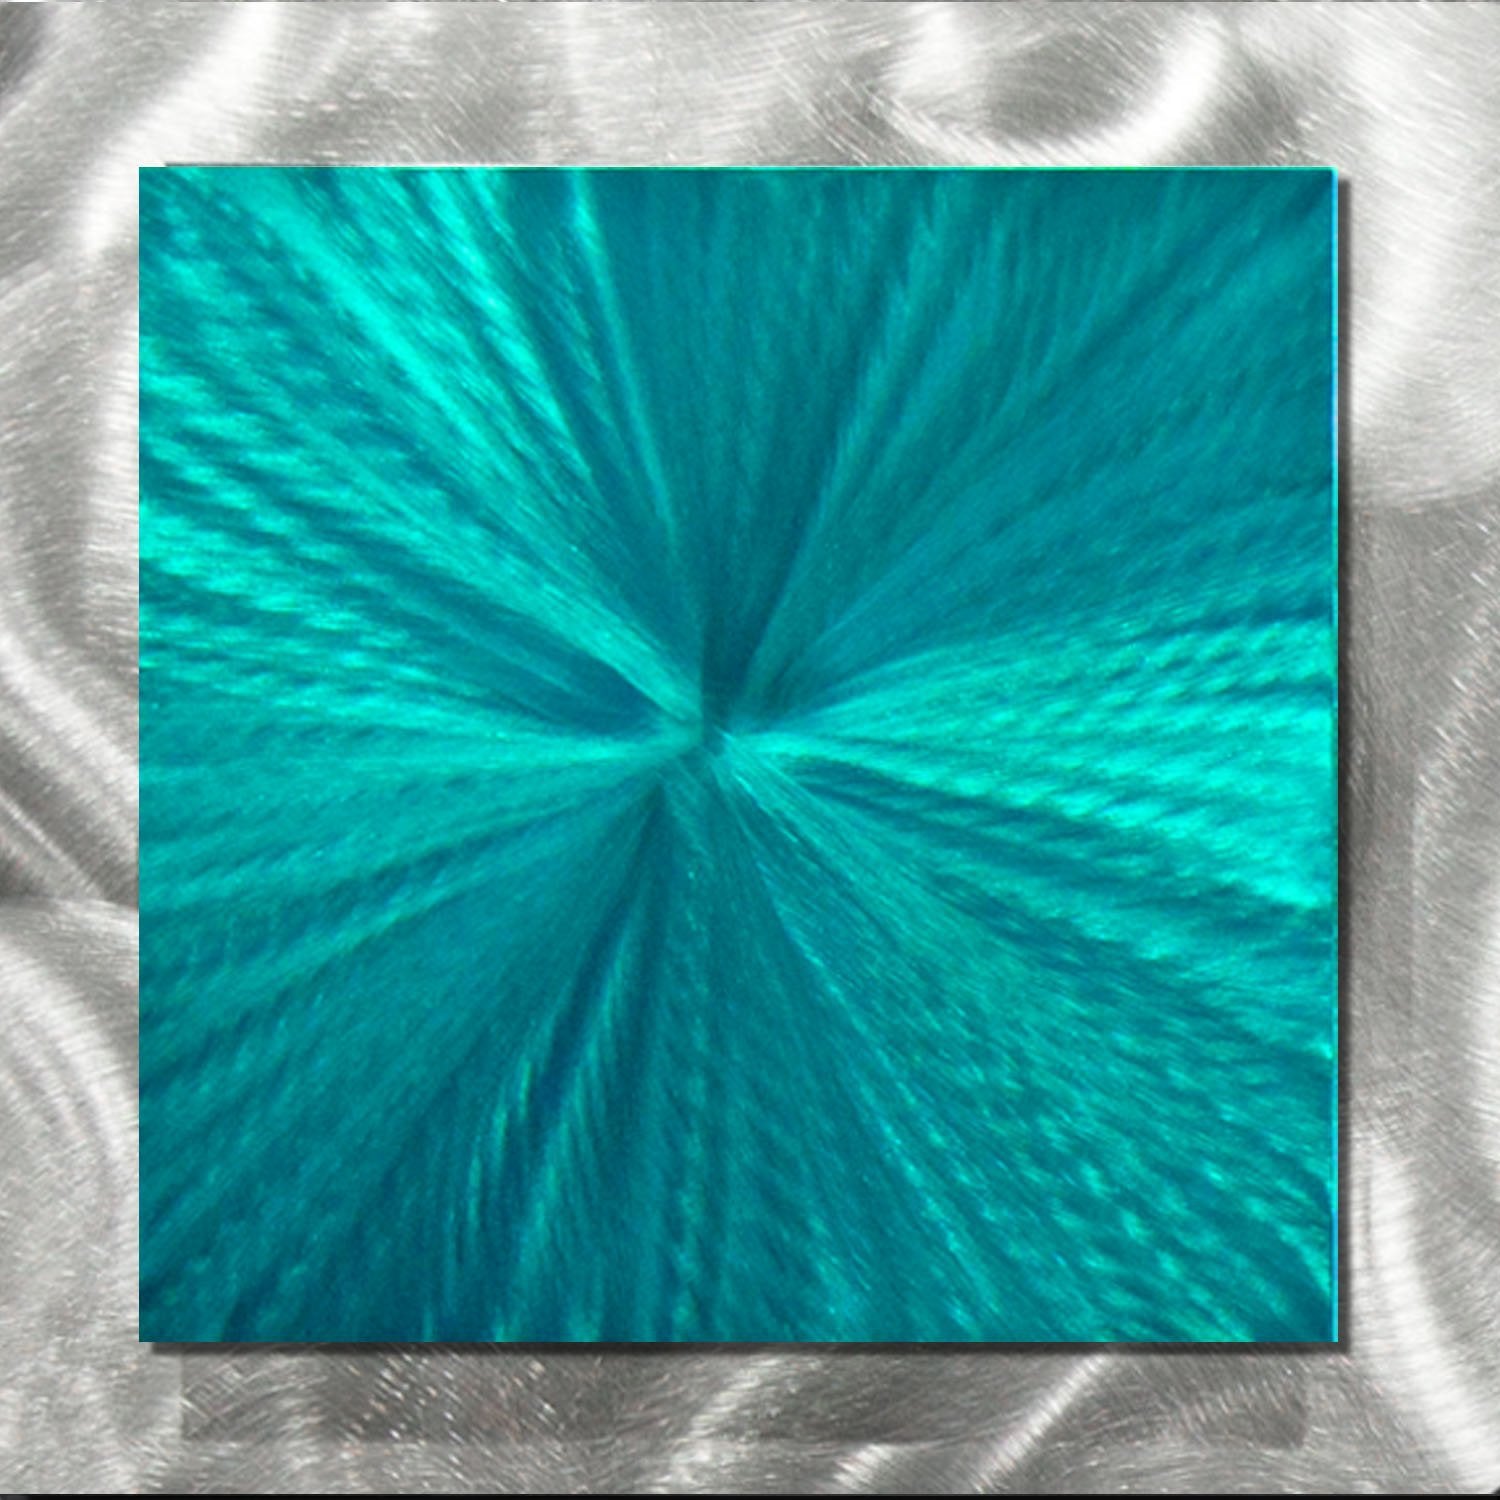 Teal & Silver Abstract Metal Wall Art Accents by Jon Allen12